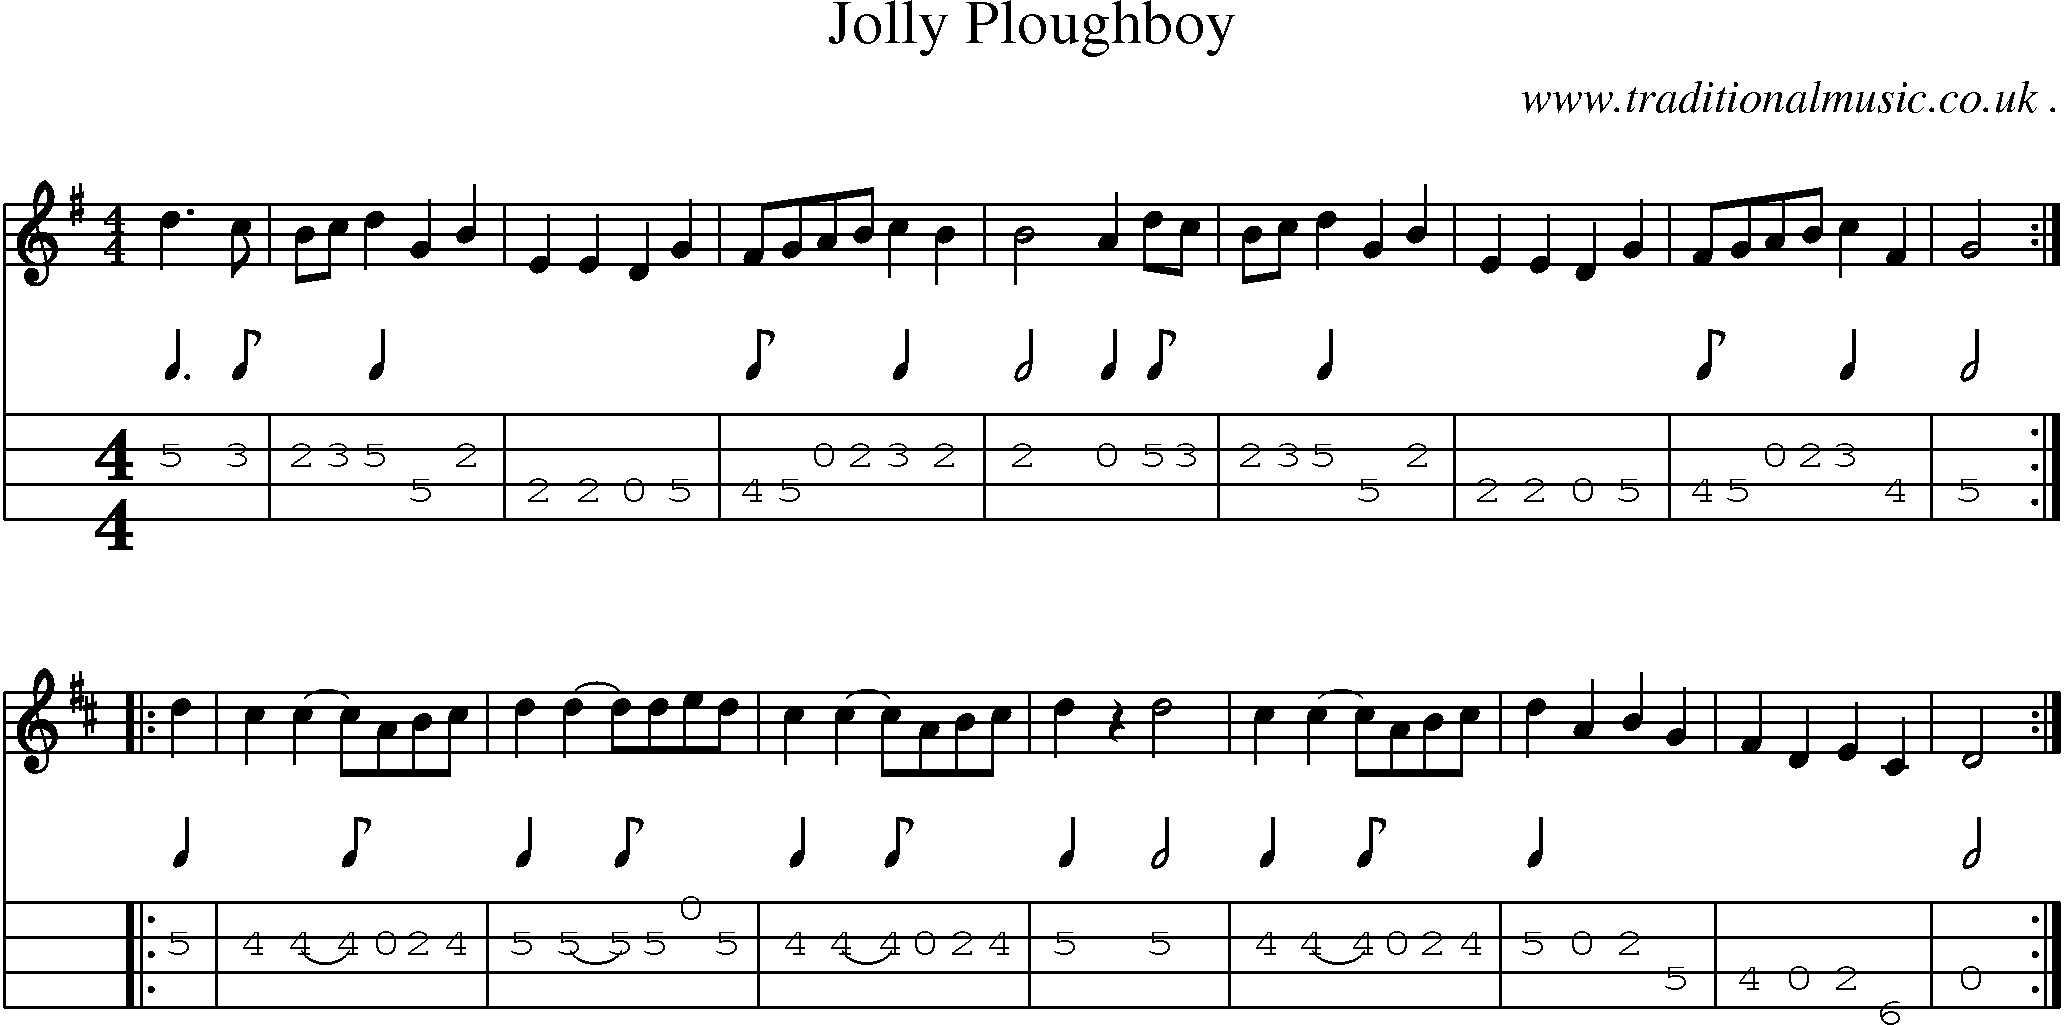 Sheet-music  score, Chords and Mandolin Tabs for Jolly Ploughboy